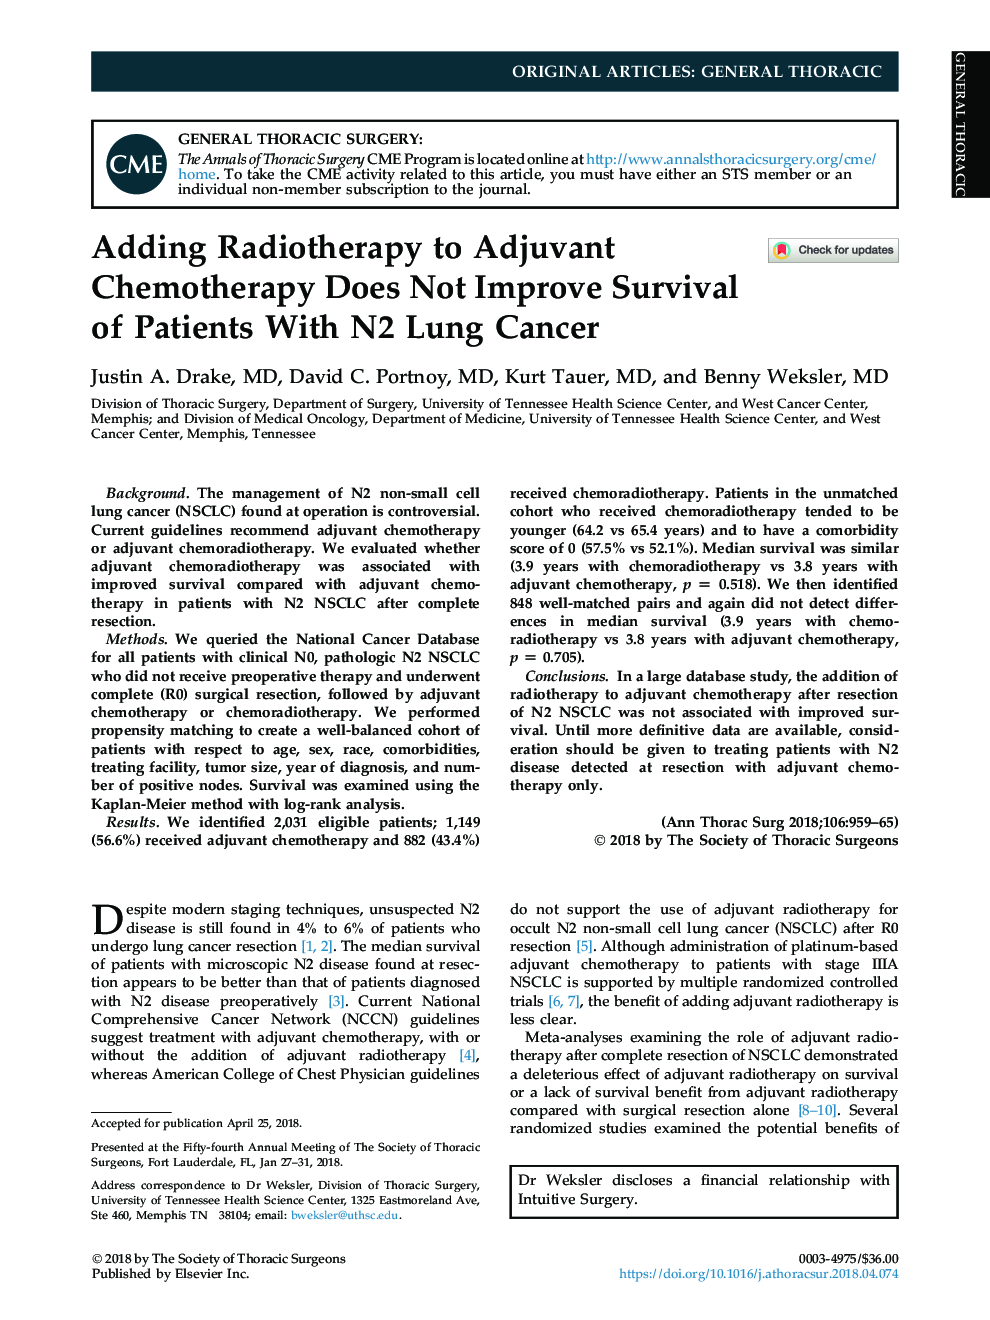 Adding Radiotherapy to Adjuvant Chemotherapy Does Not Improve Survival of Patients With N2 Lung Cancer